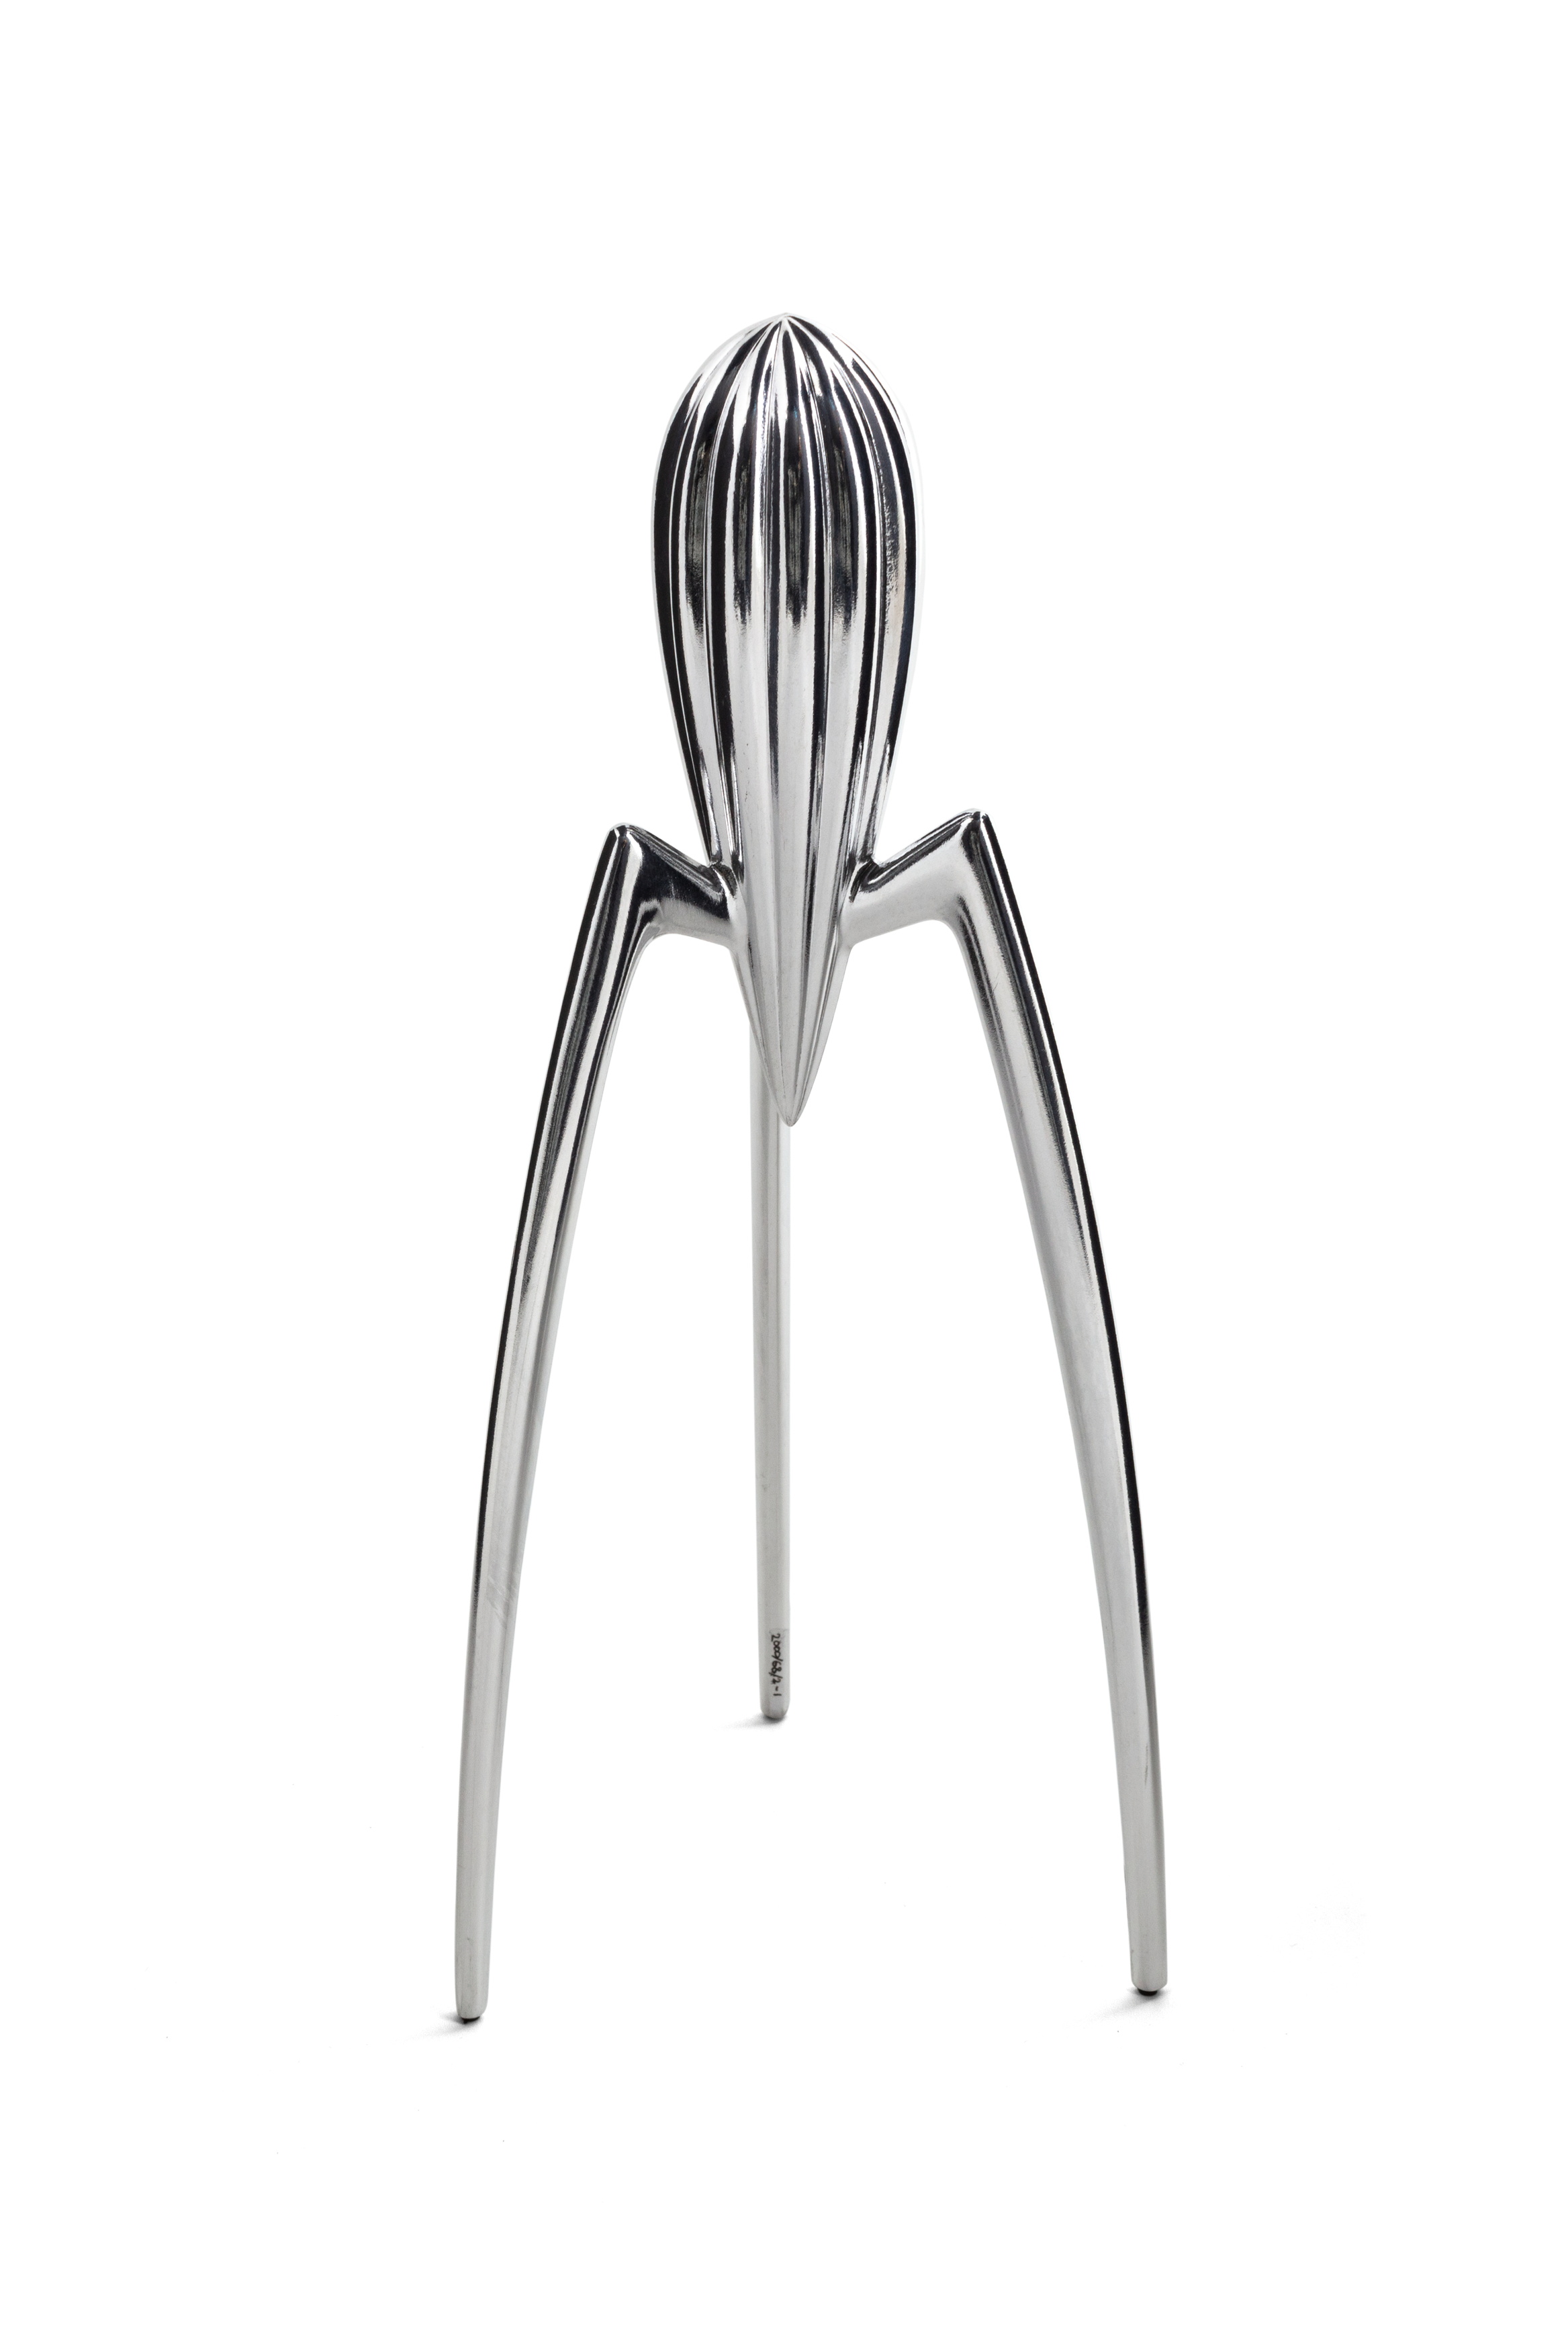 'Juicy Salif' lemon squeezer by Philippe Starck for Alessi